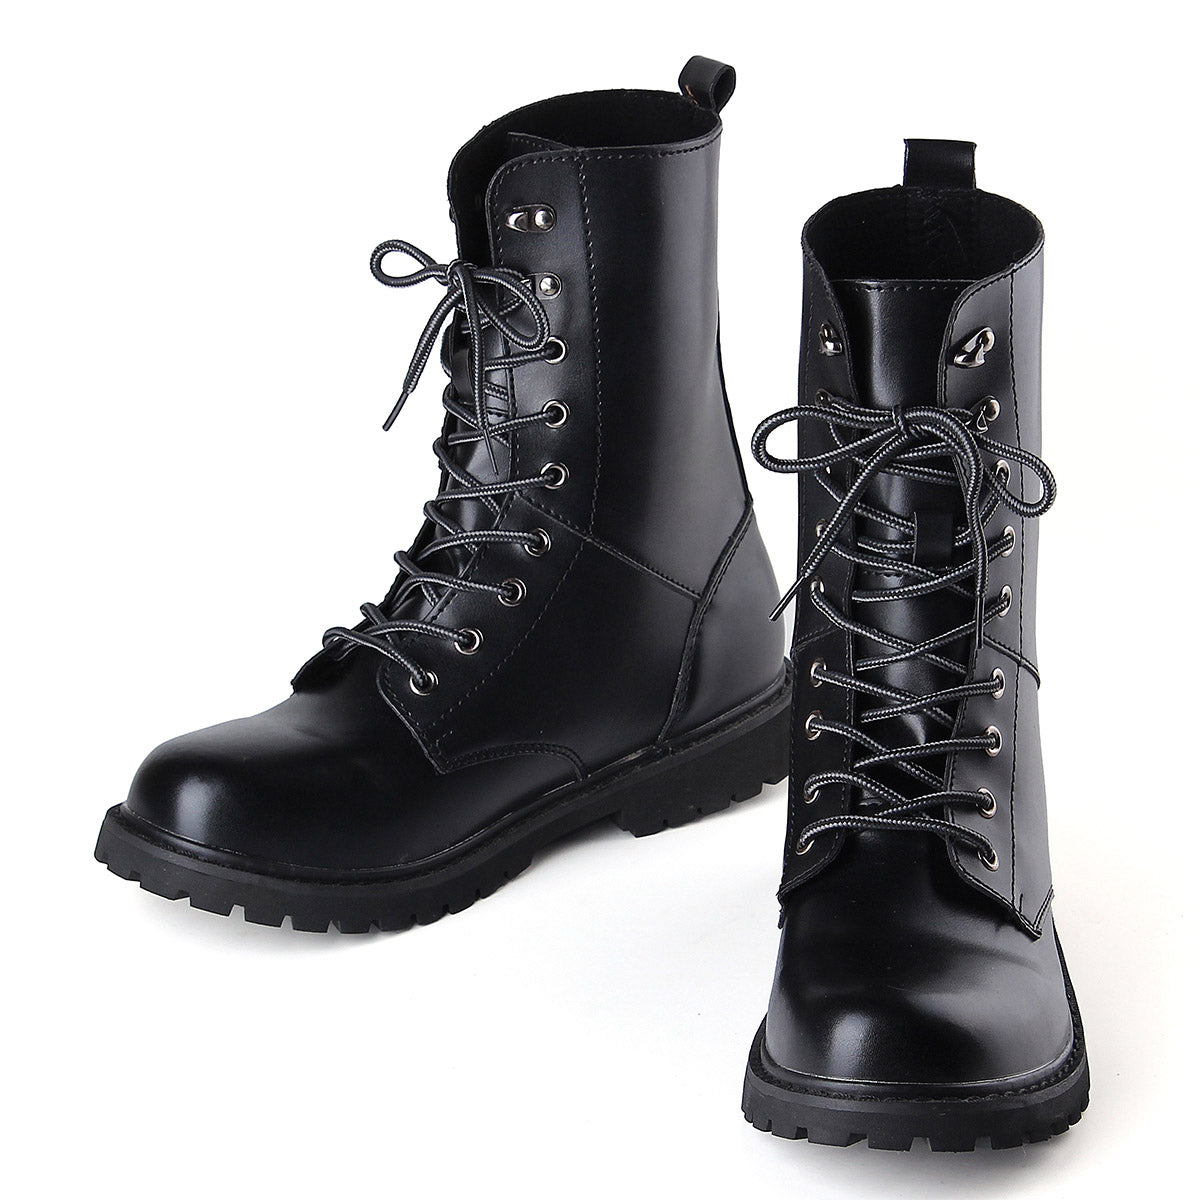 Men's Winter Keep Warm Waterproof Non-Slip Black Combat PU Leather Lace Up Jungle Hiking Snow Boots